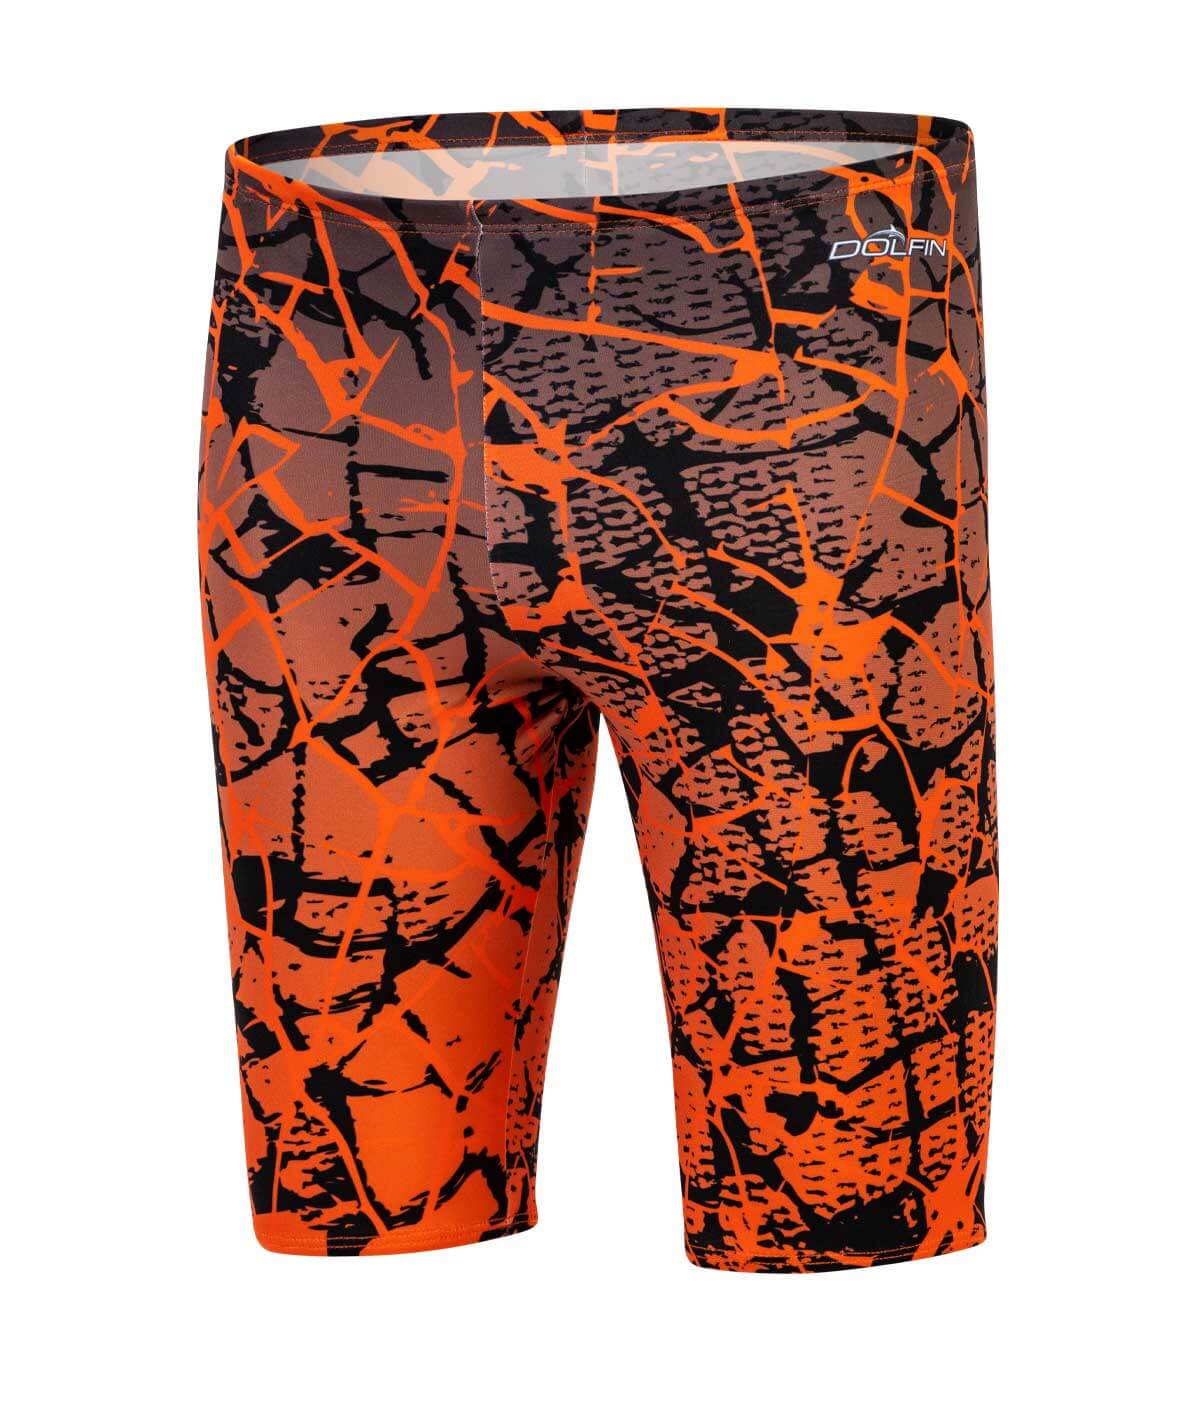 Men's Sublimated Jammer